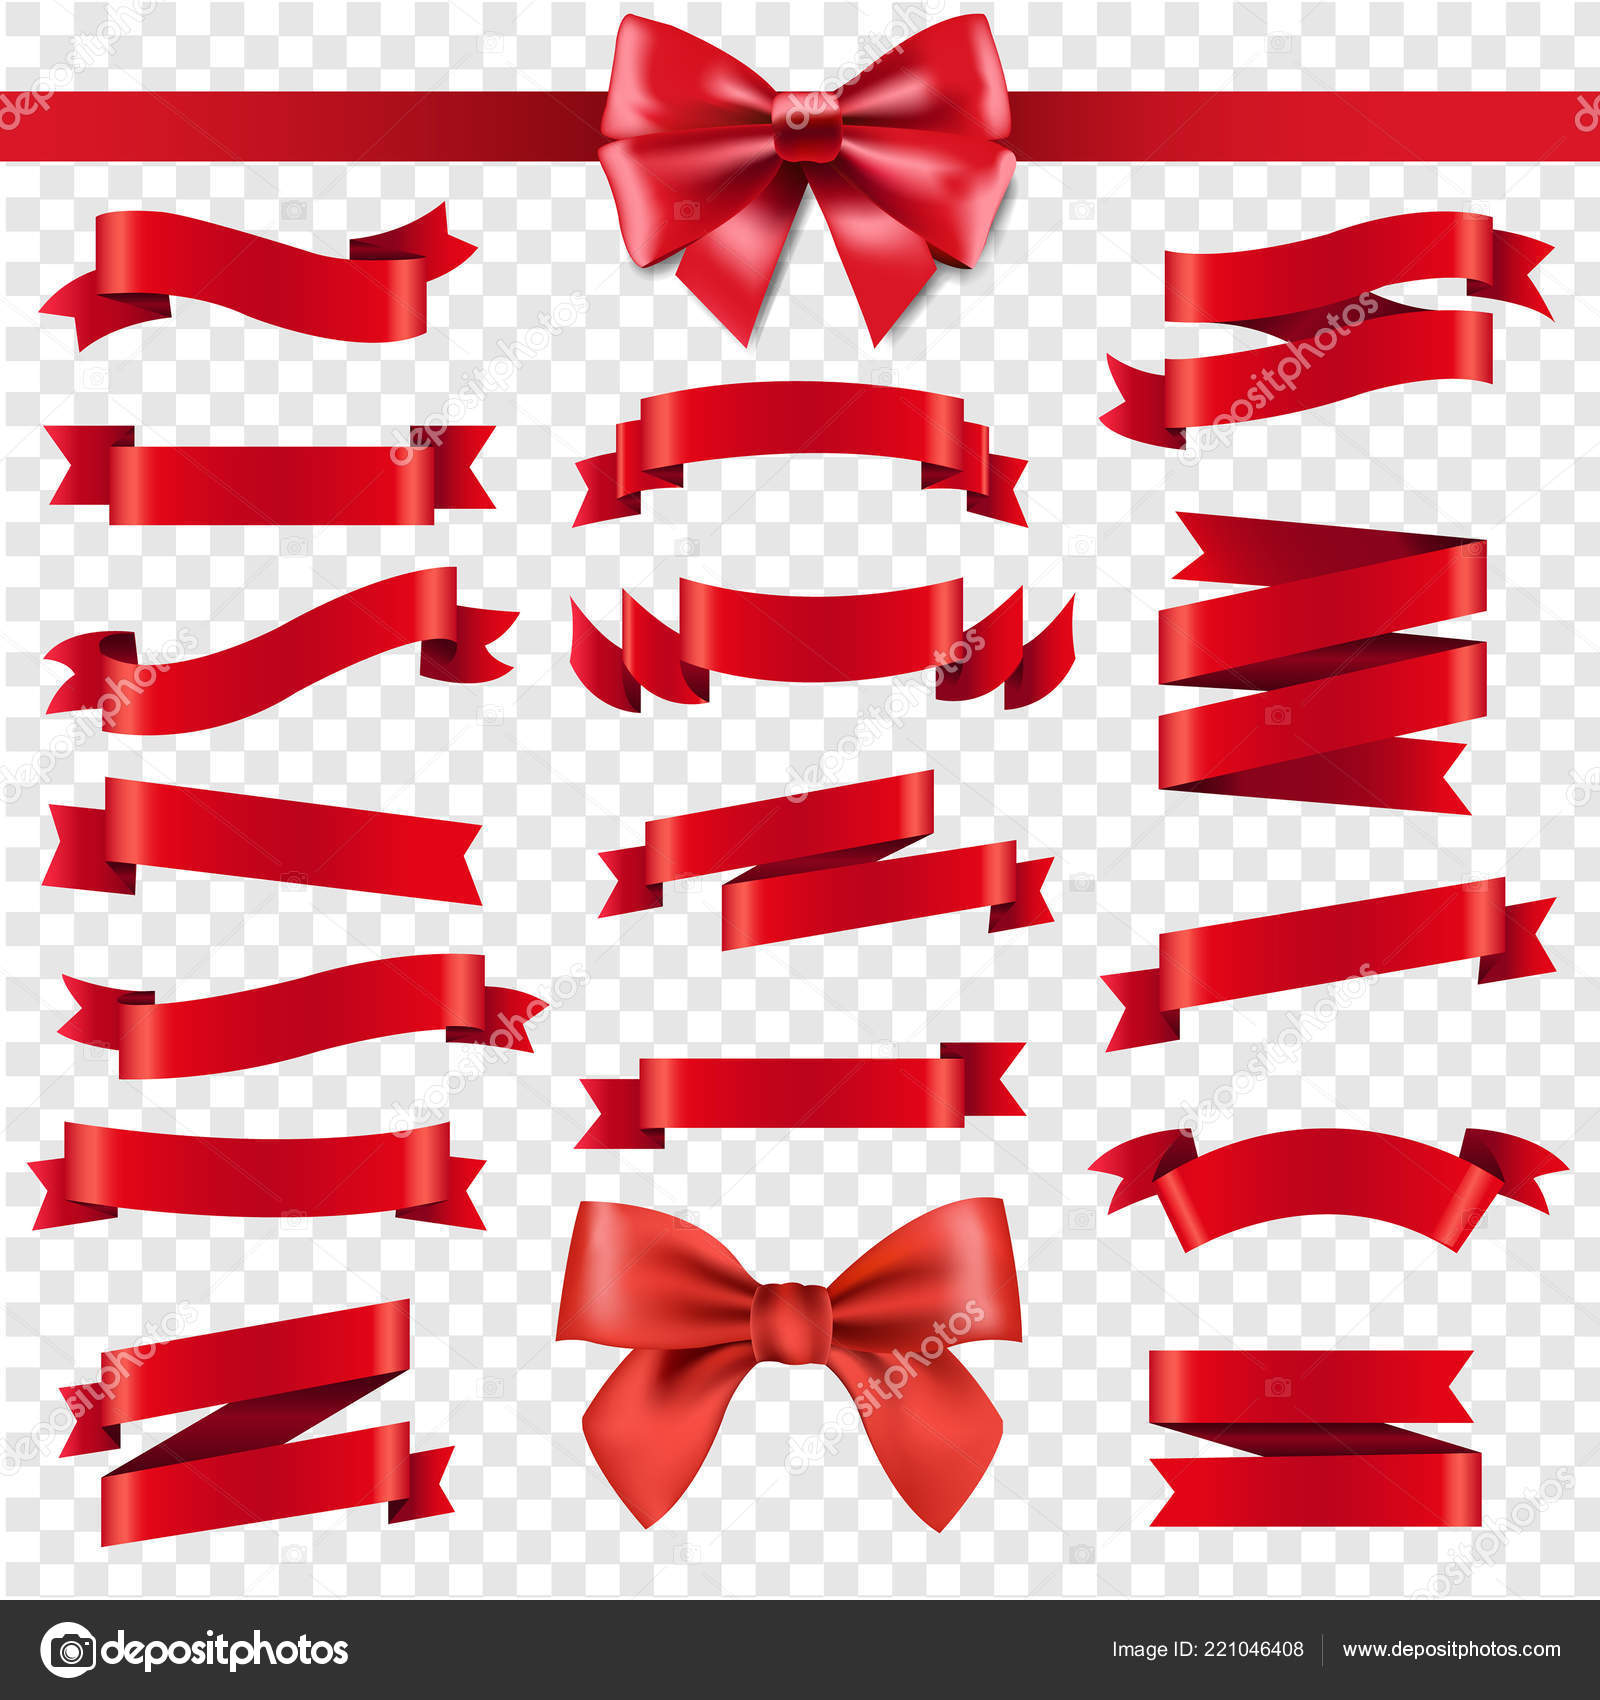 Cute red ribbons and bows top side view set Vector Image